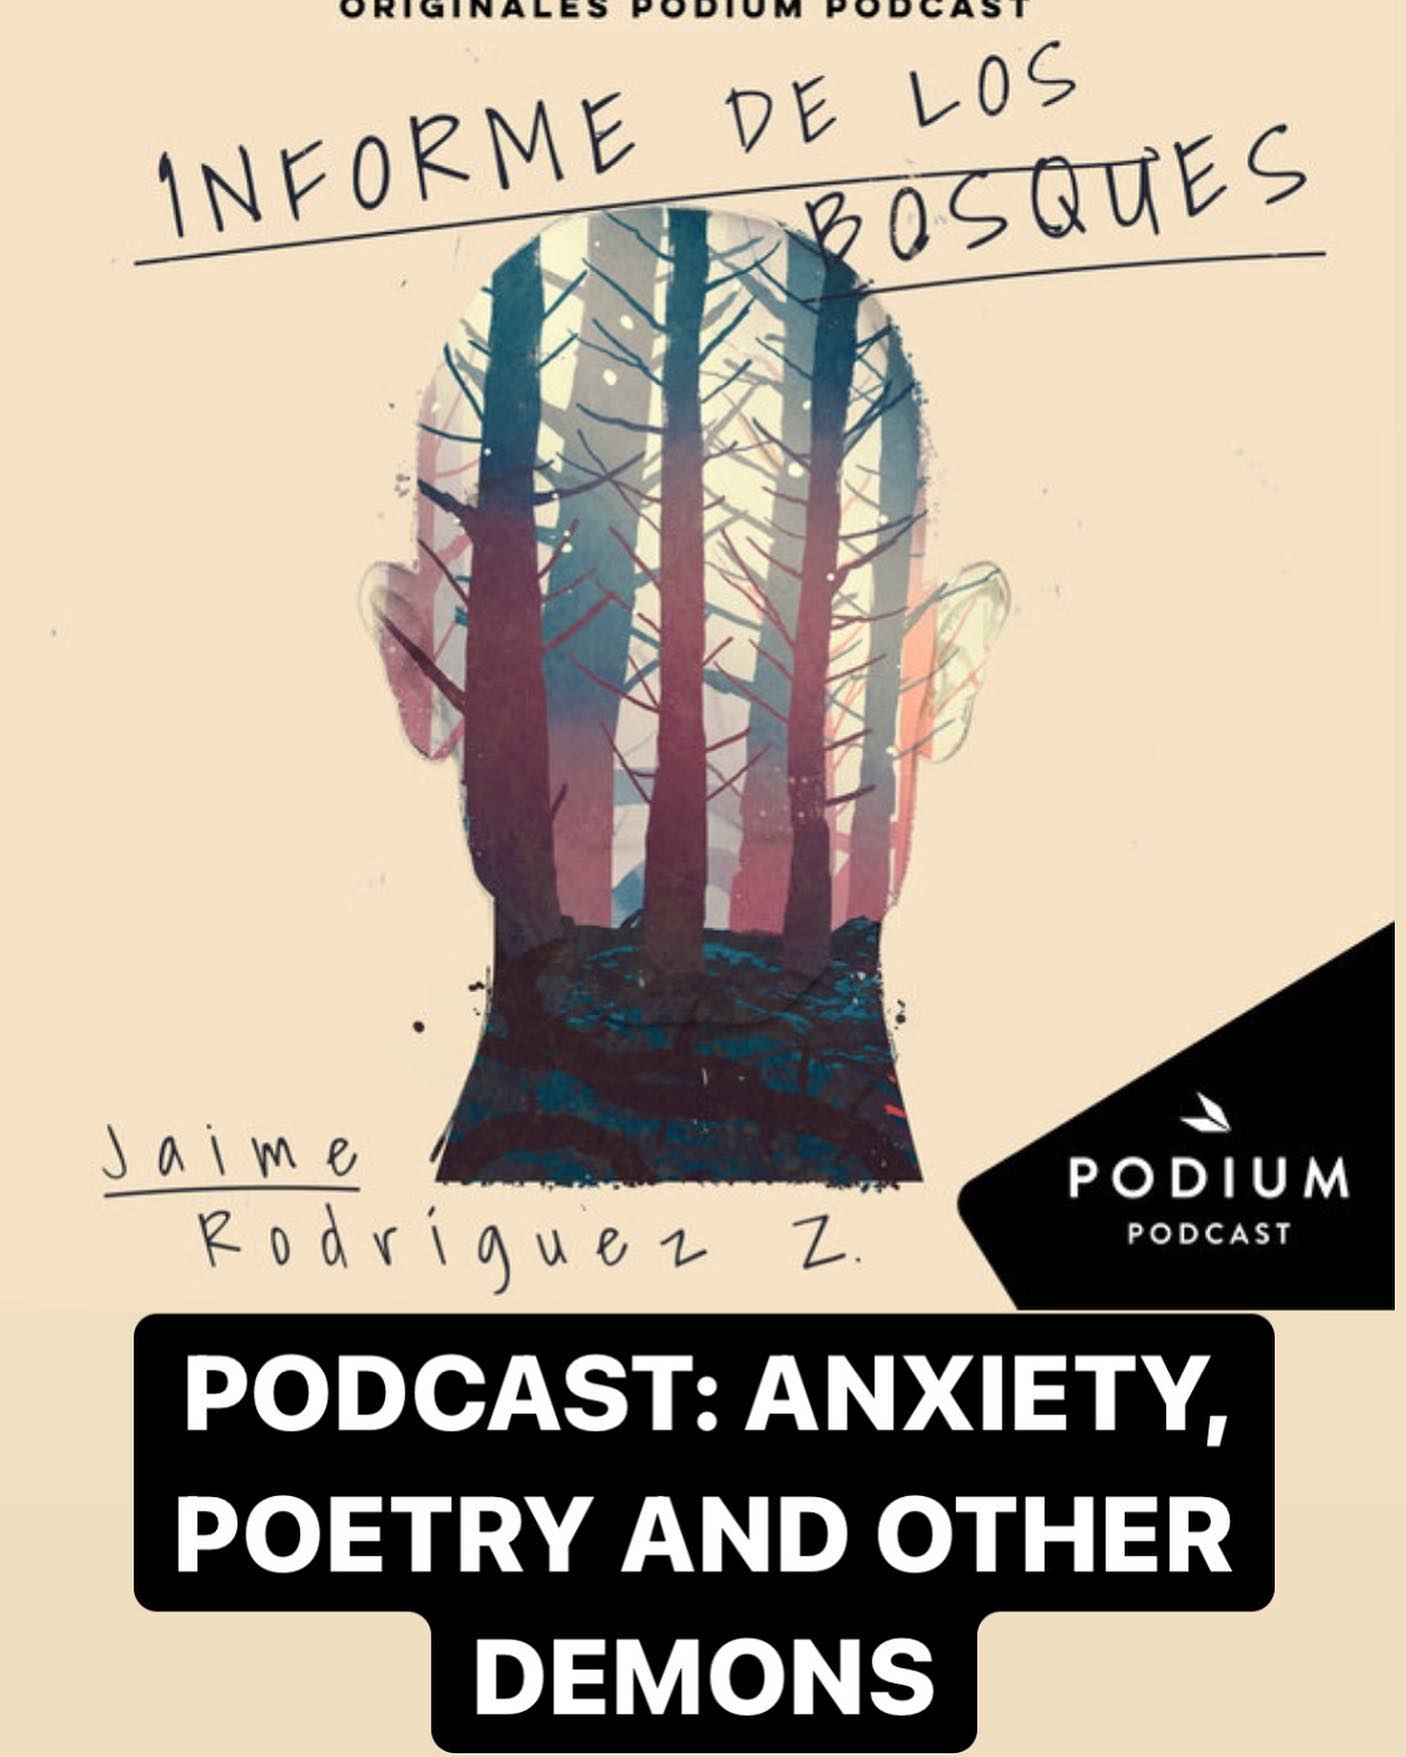 In a context of mental health global crisis in our pandemic world, @jaimerodriguezavaleta, a Peruvian journalist living in Madrid, writes and narrates “Informe de los Bosques” [Report of the Forests], a @podiumpodcast in Spanish about “anxiety and other darkness.” Historical, academic, statistical, and poetic references complement an intense struggling personal story. A fierce testimony, while deconstructing itself at every step, seeks to serve as therapy. 

Review by @paulalonso1 

Link in bio to read the complete review in English and Spanish. 

#podcast #mentalhealth #spanishpodcast #peruvianpoetry #anxiety #depression #writing #review #salud mental #depresión